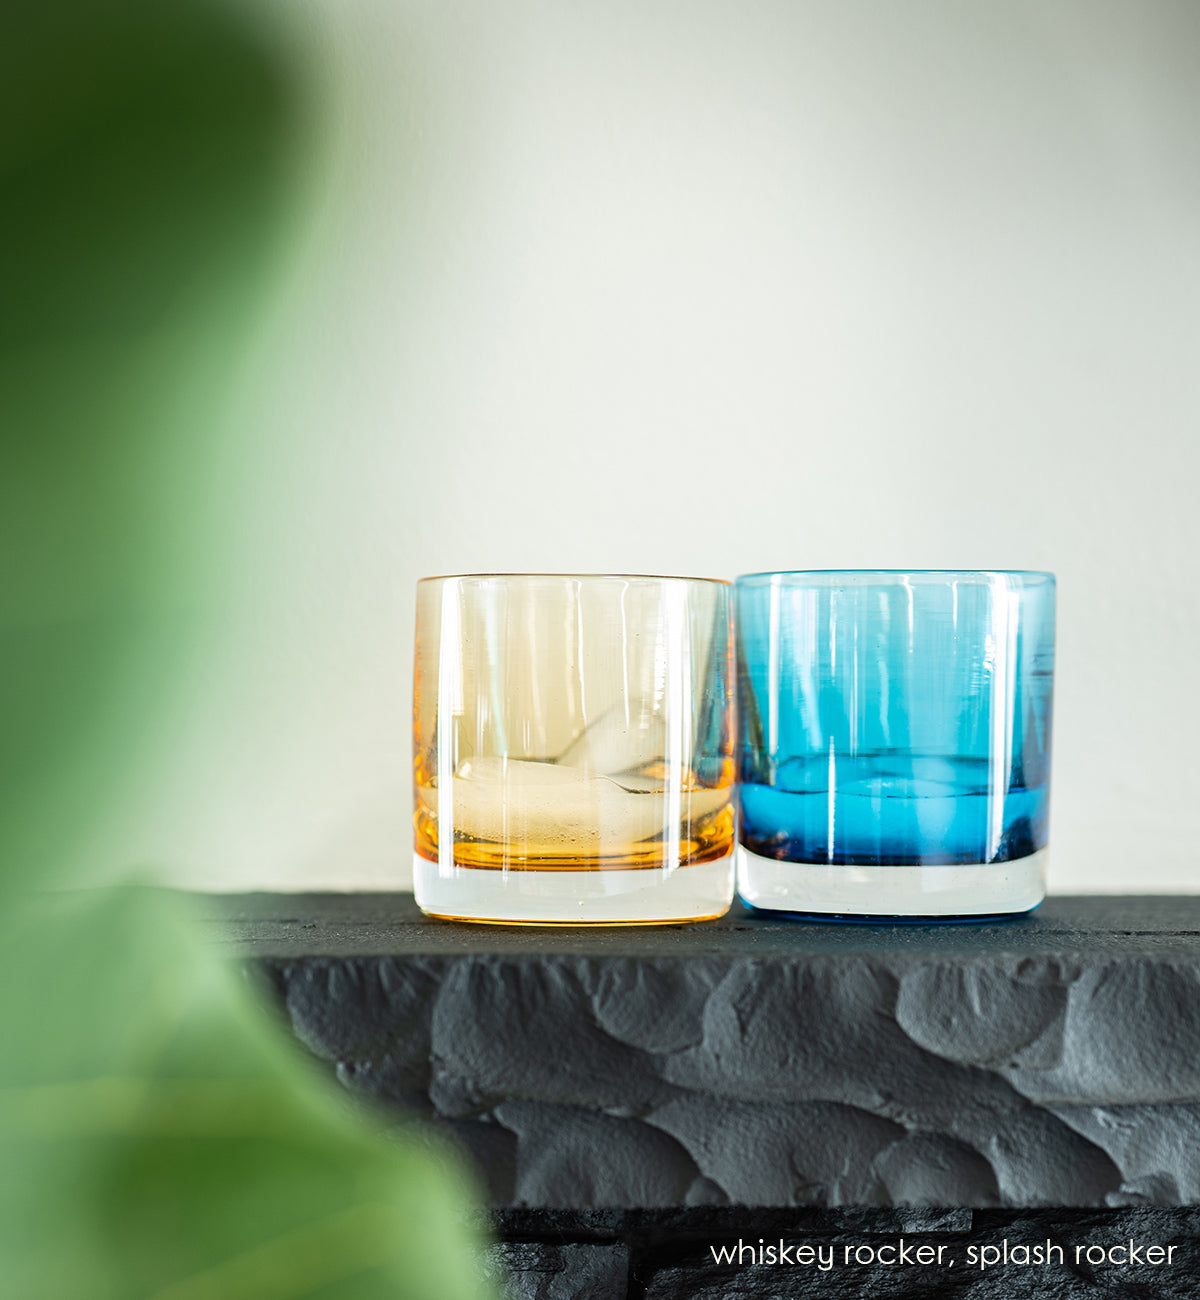 splash rocker, transparent bright blue hand-blown lowball glass. paired with whiskey rocker